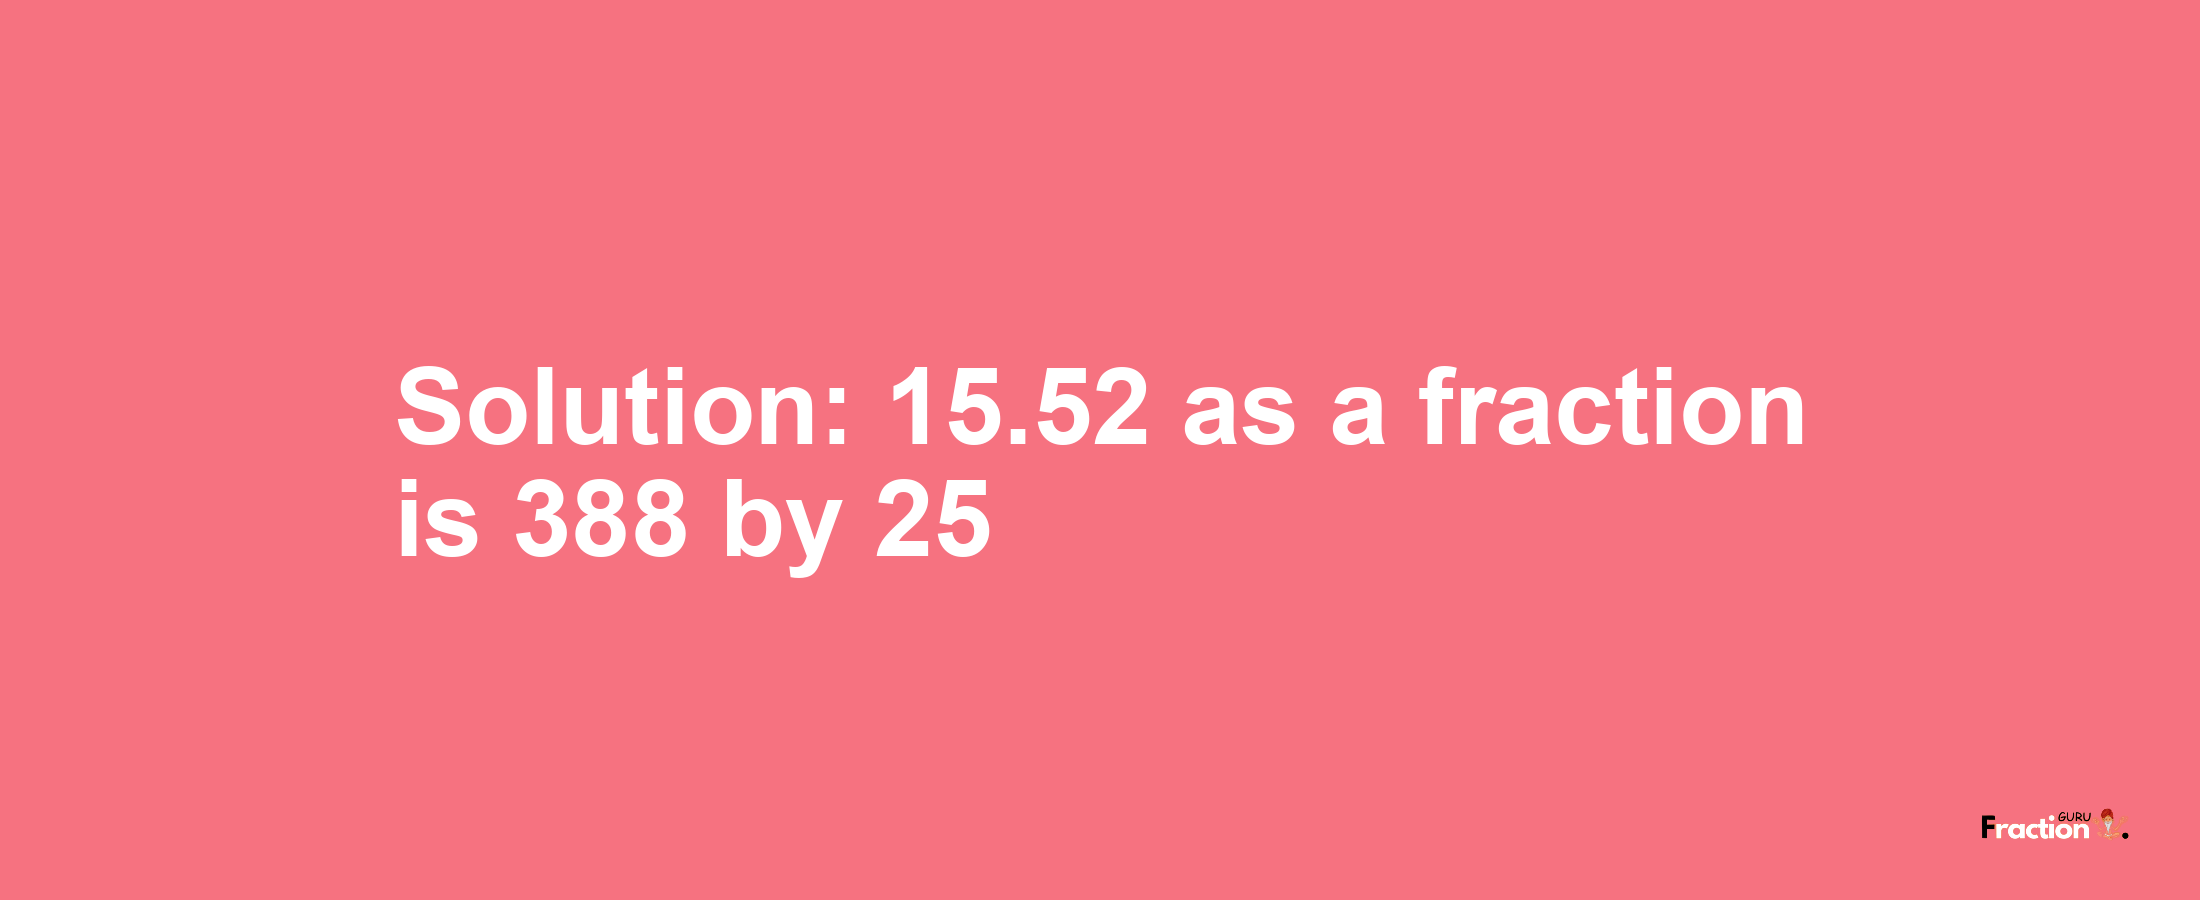 Solution:15.52 as a fraction is 388/25